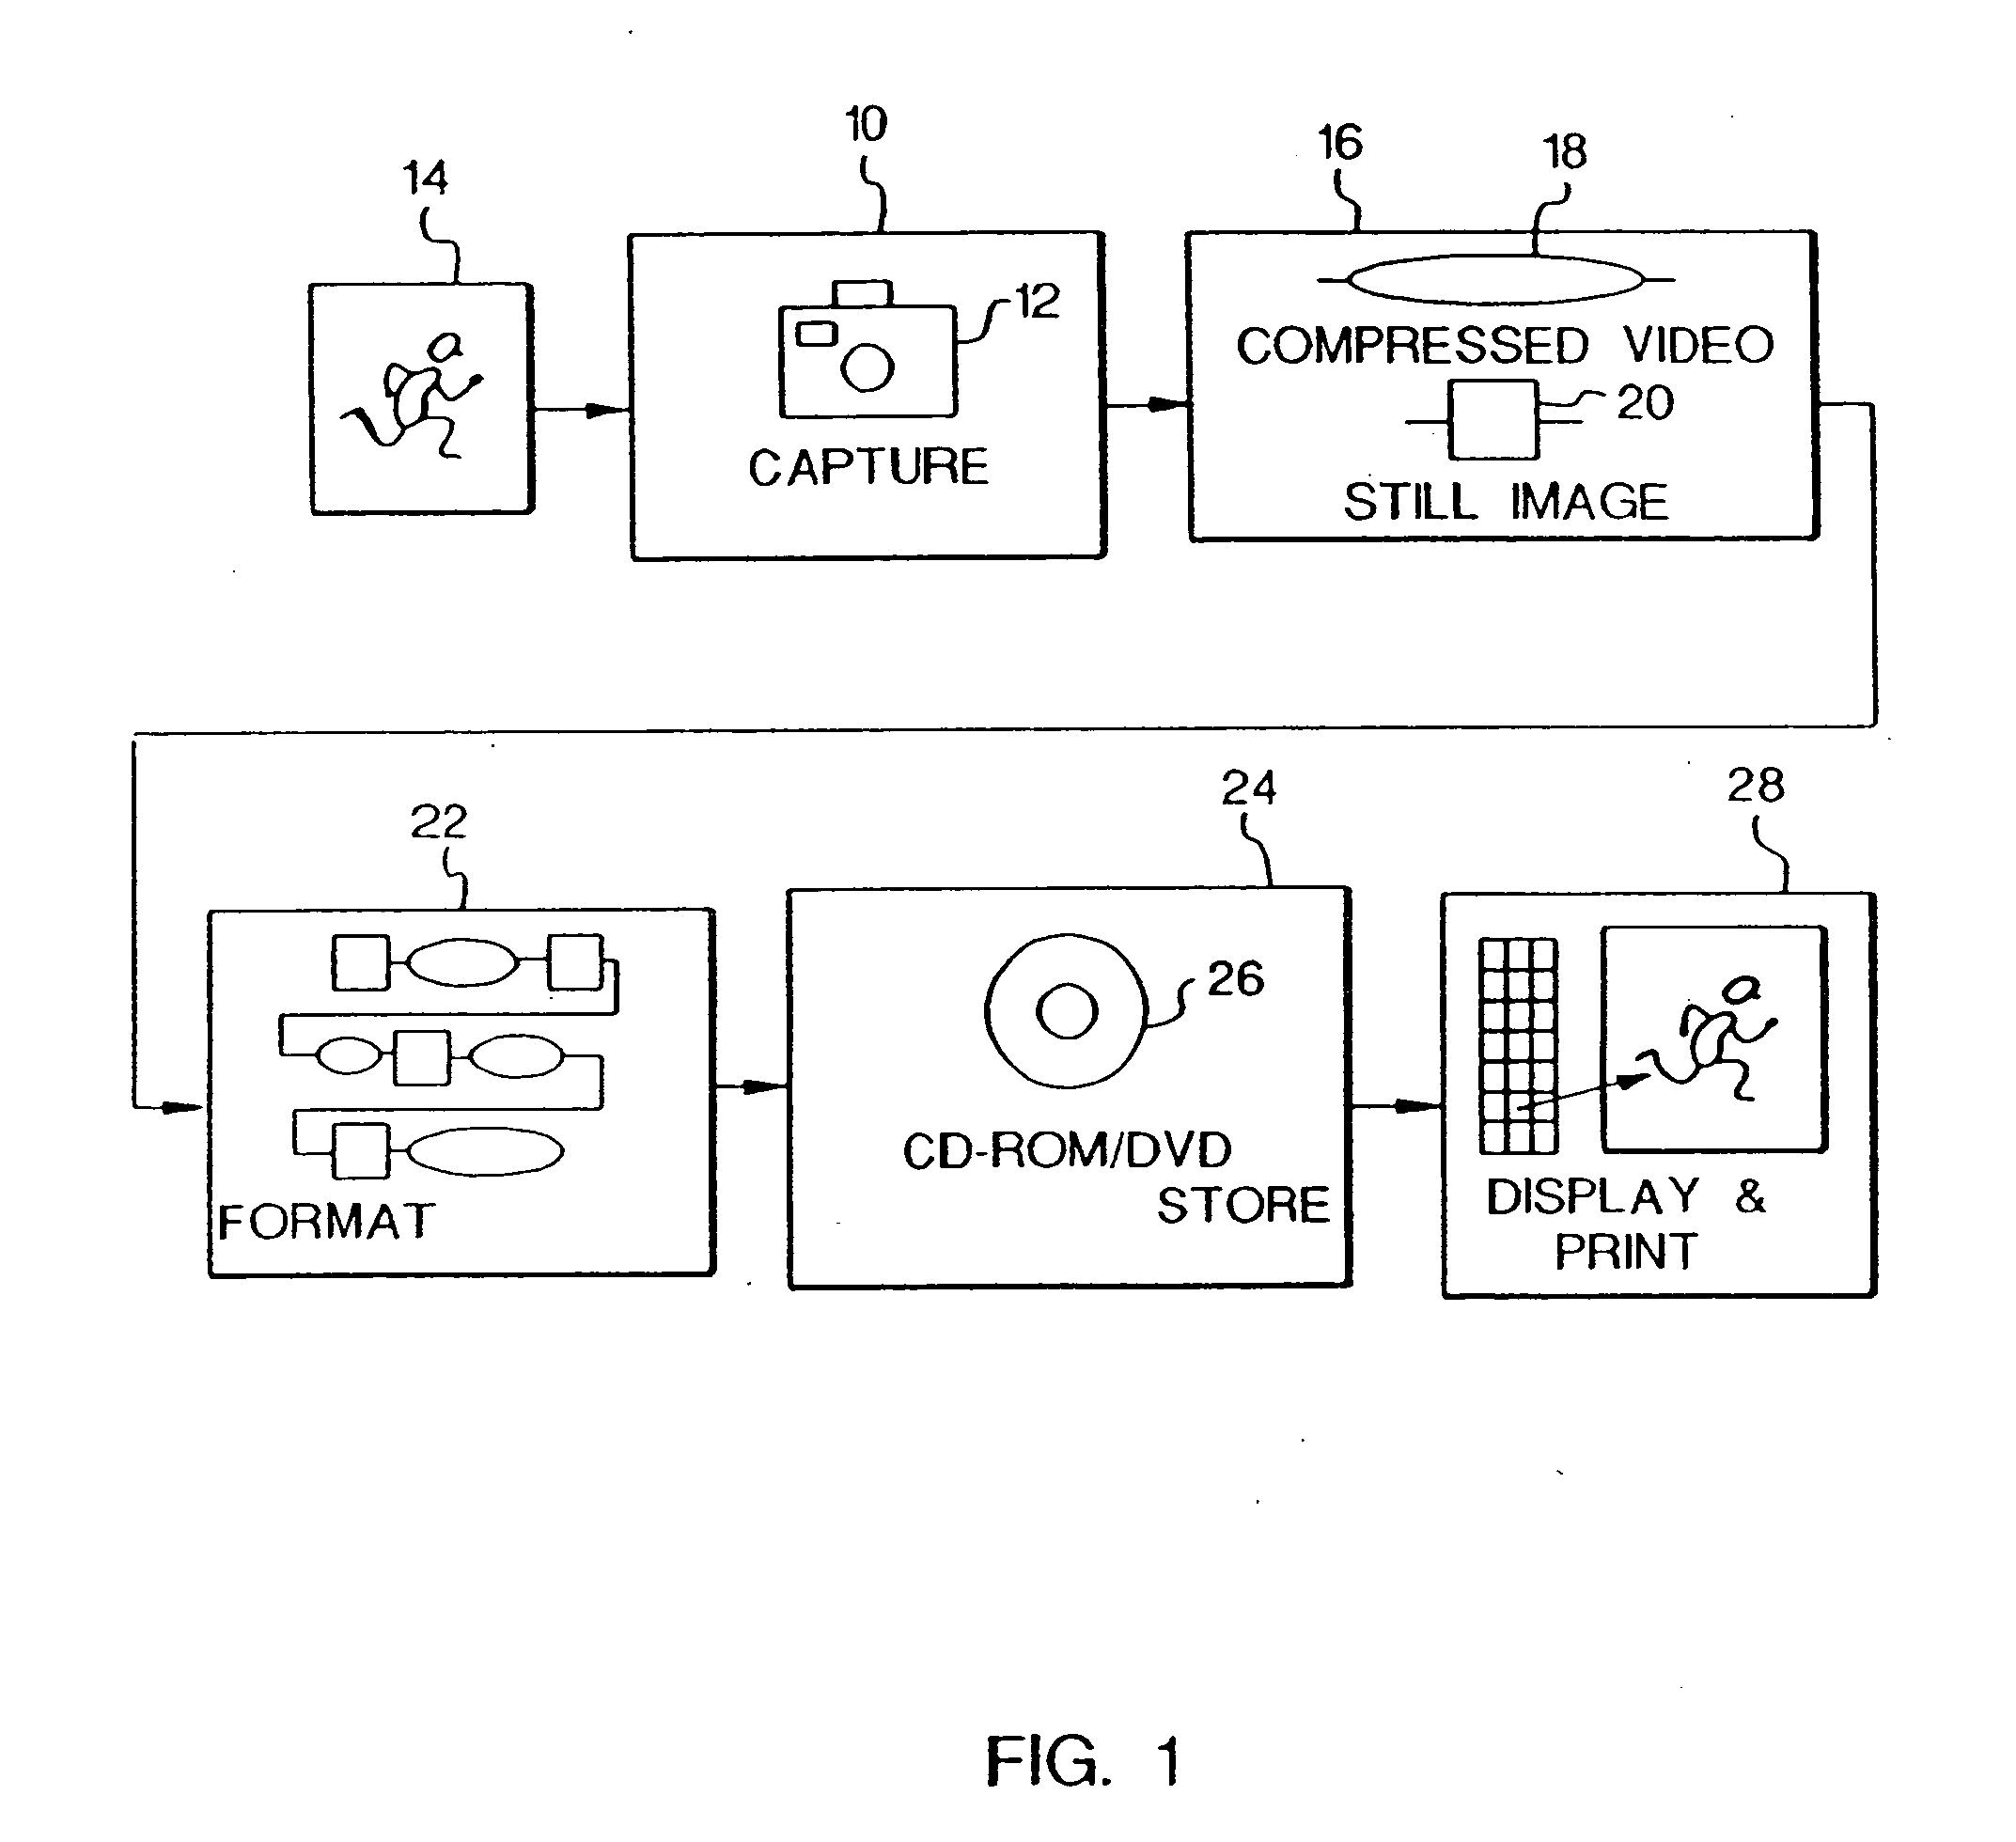 Method for simultaneously recording motion and still images in a digital camera